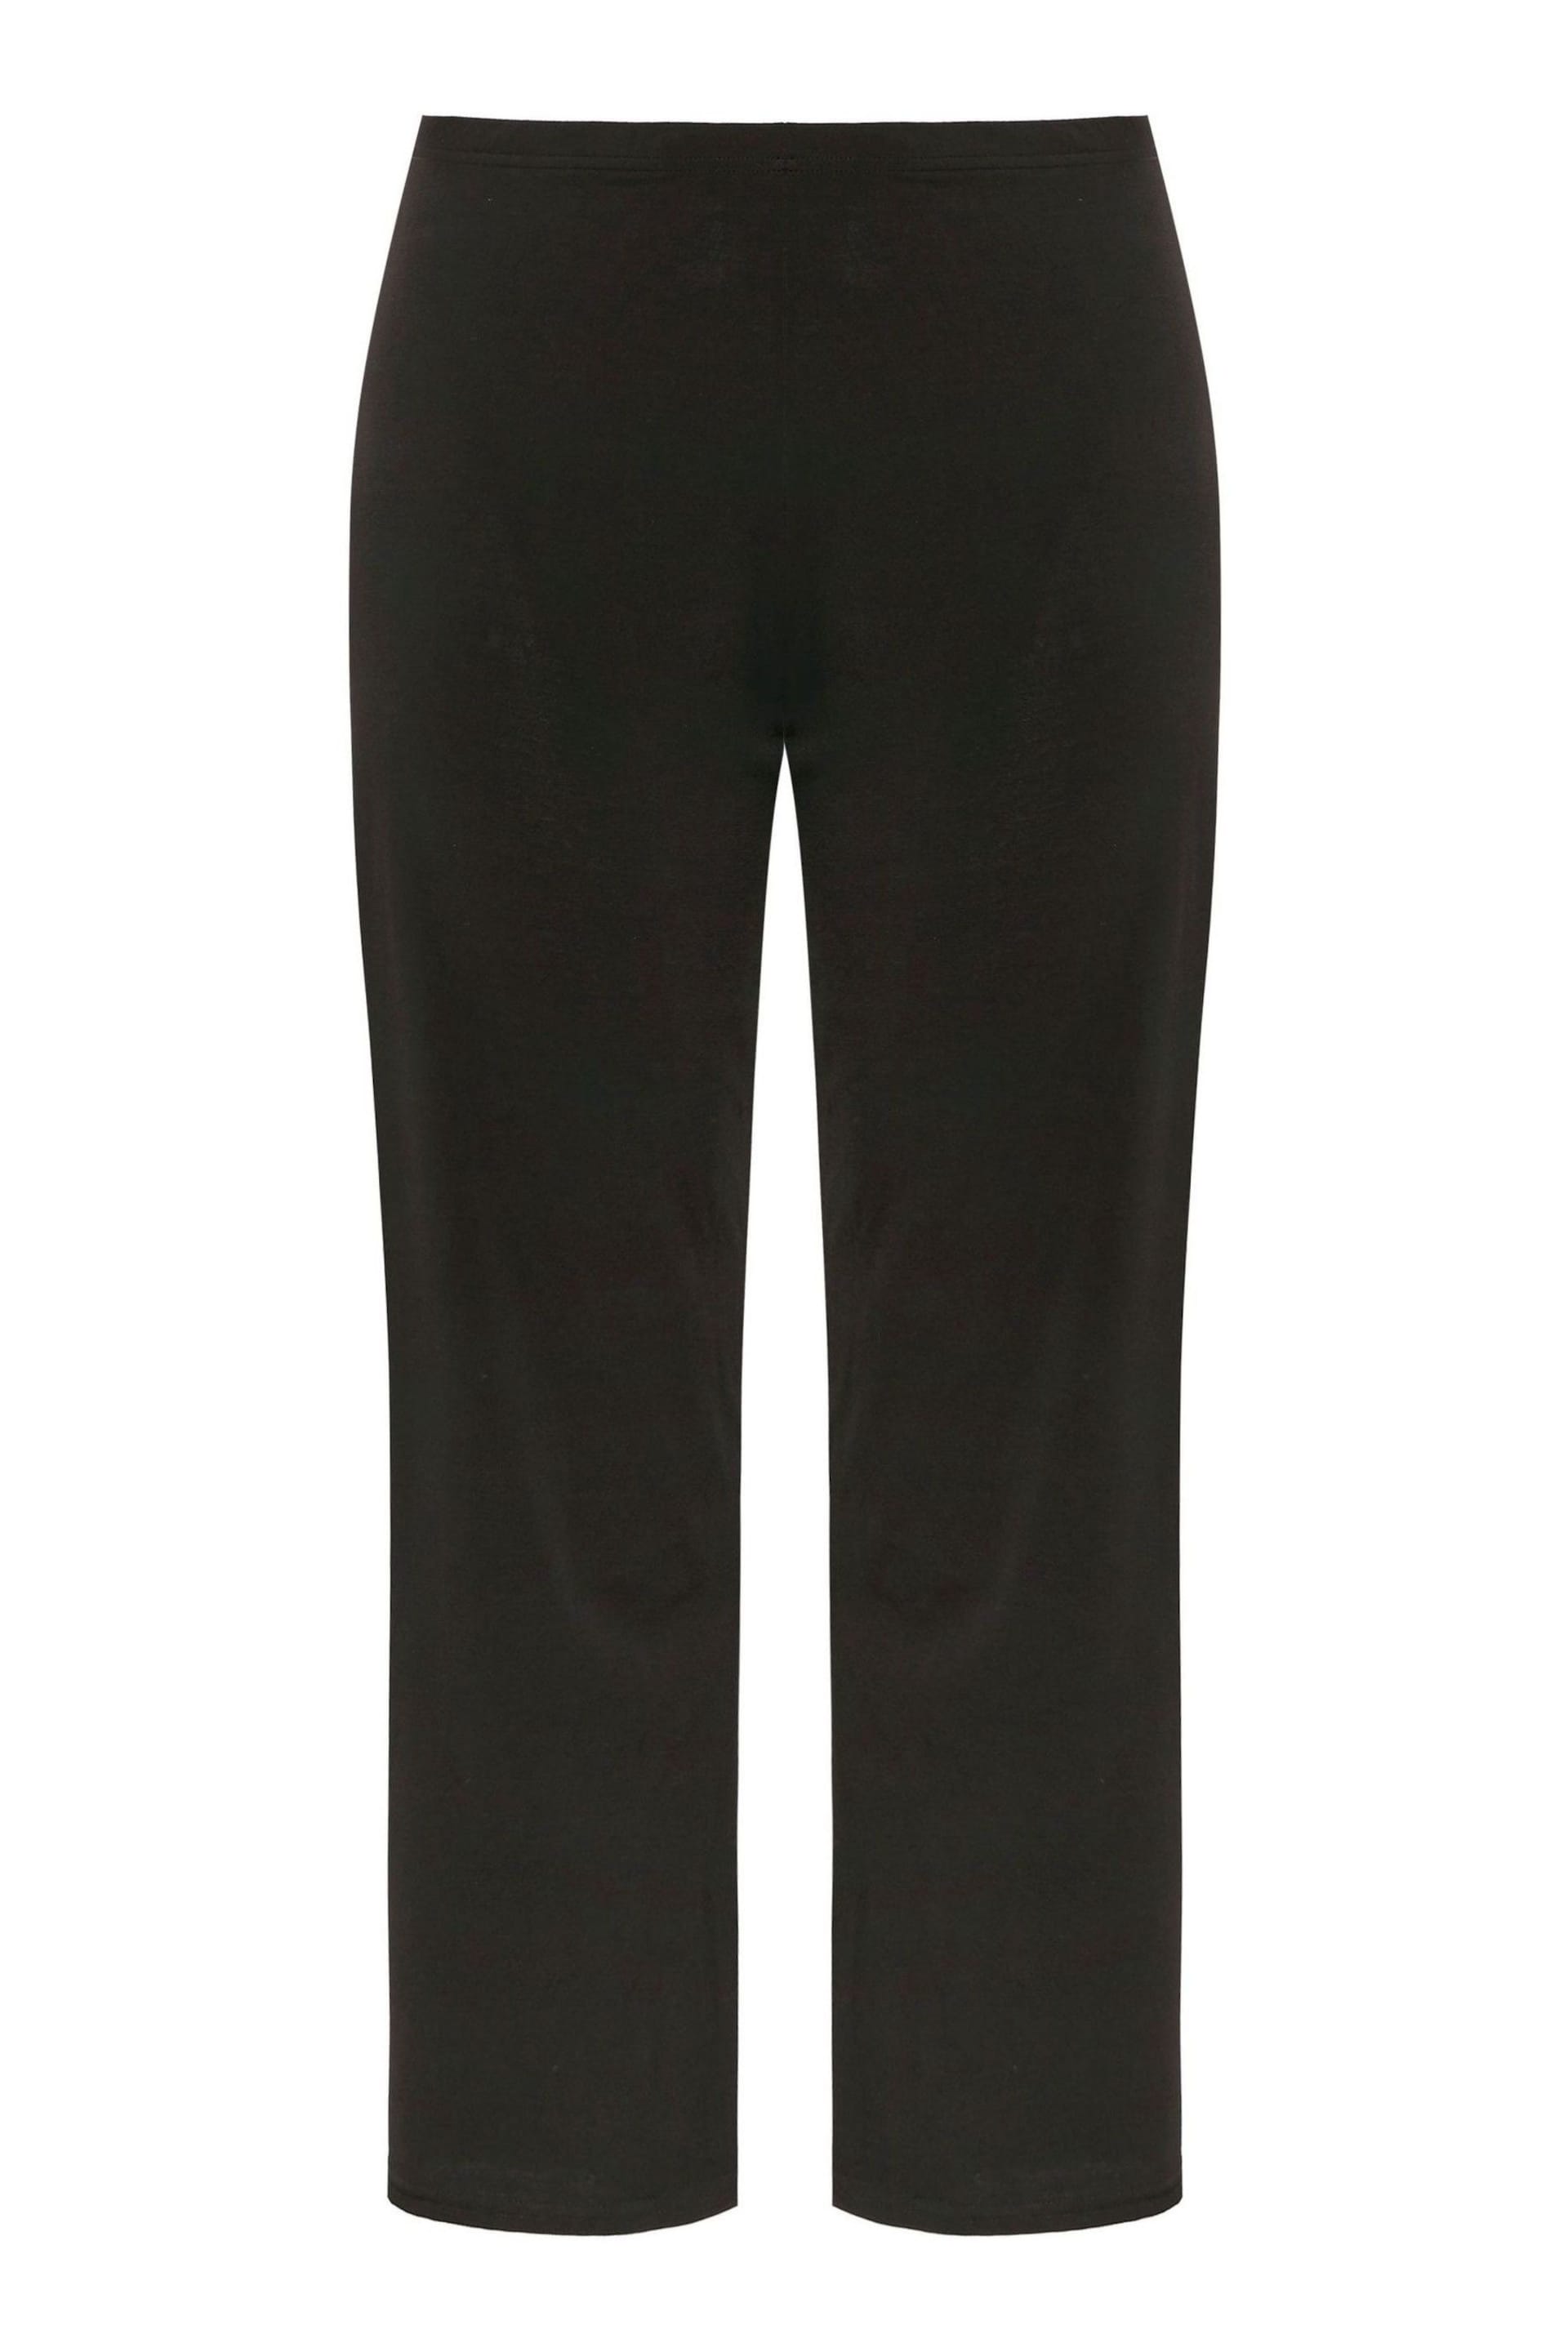 Yours Curve Black Bootcut Ponte Rib Trousers - Image 6 of 7